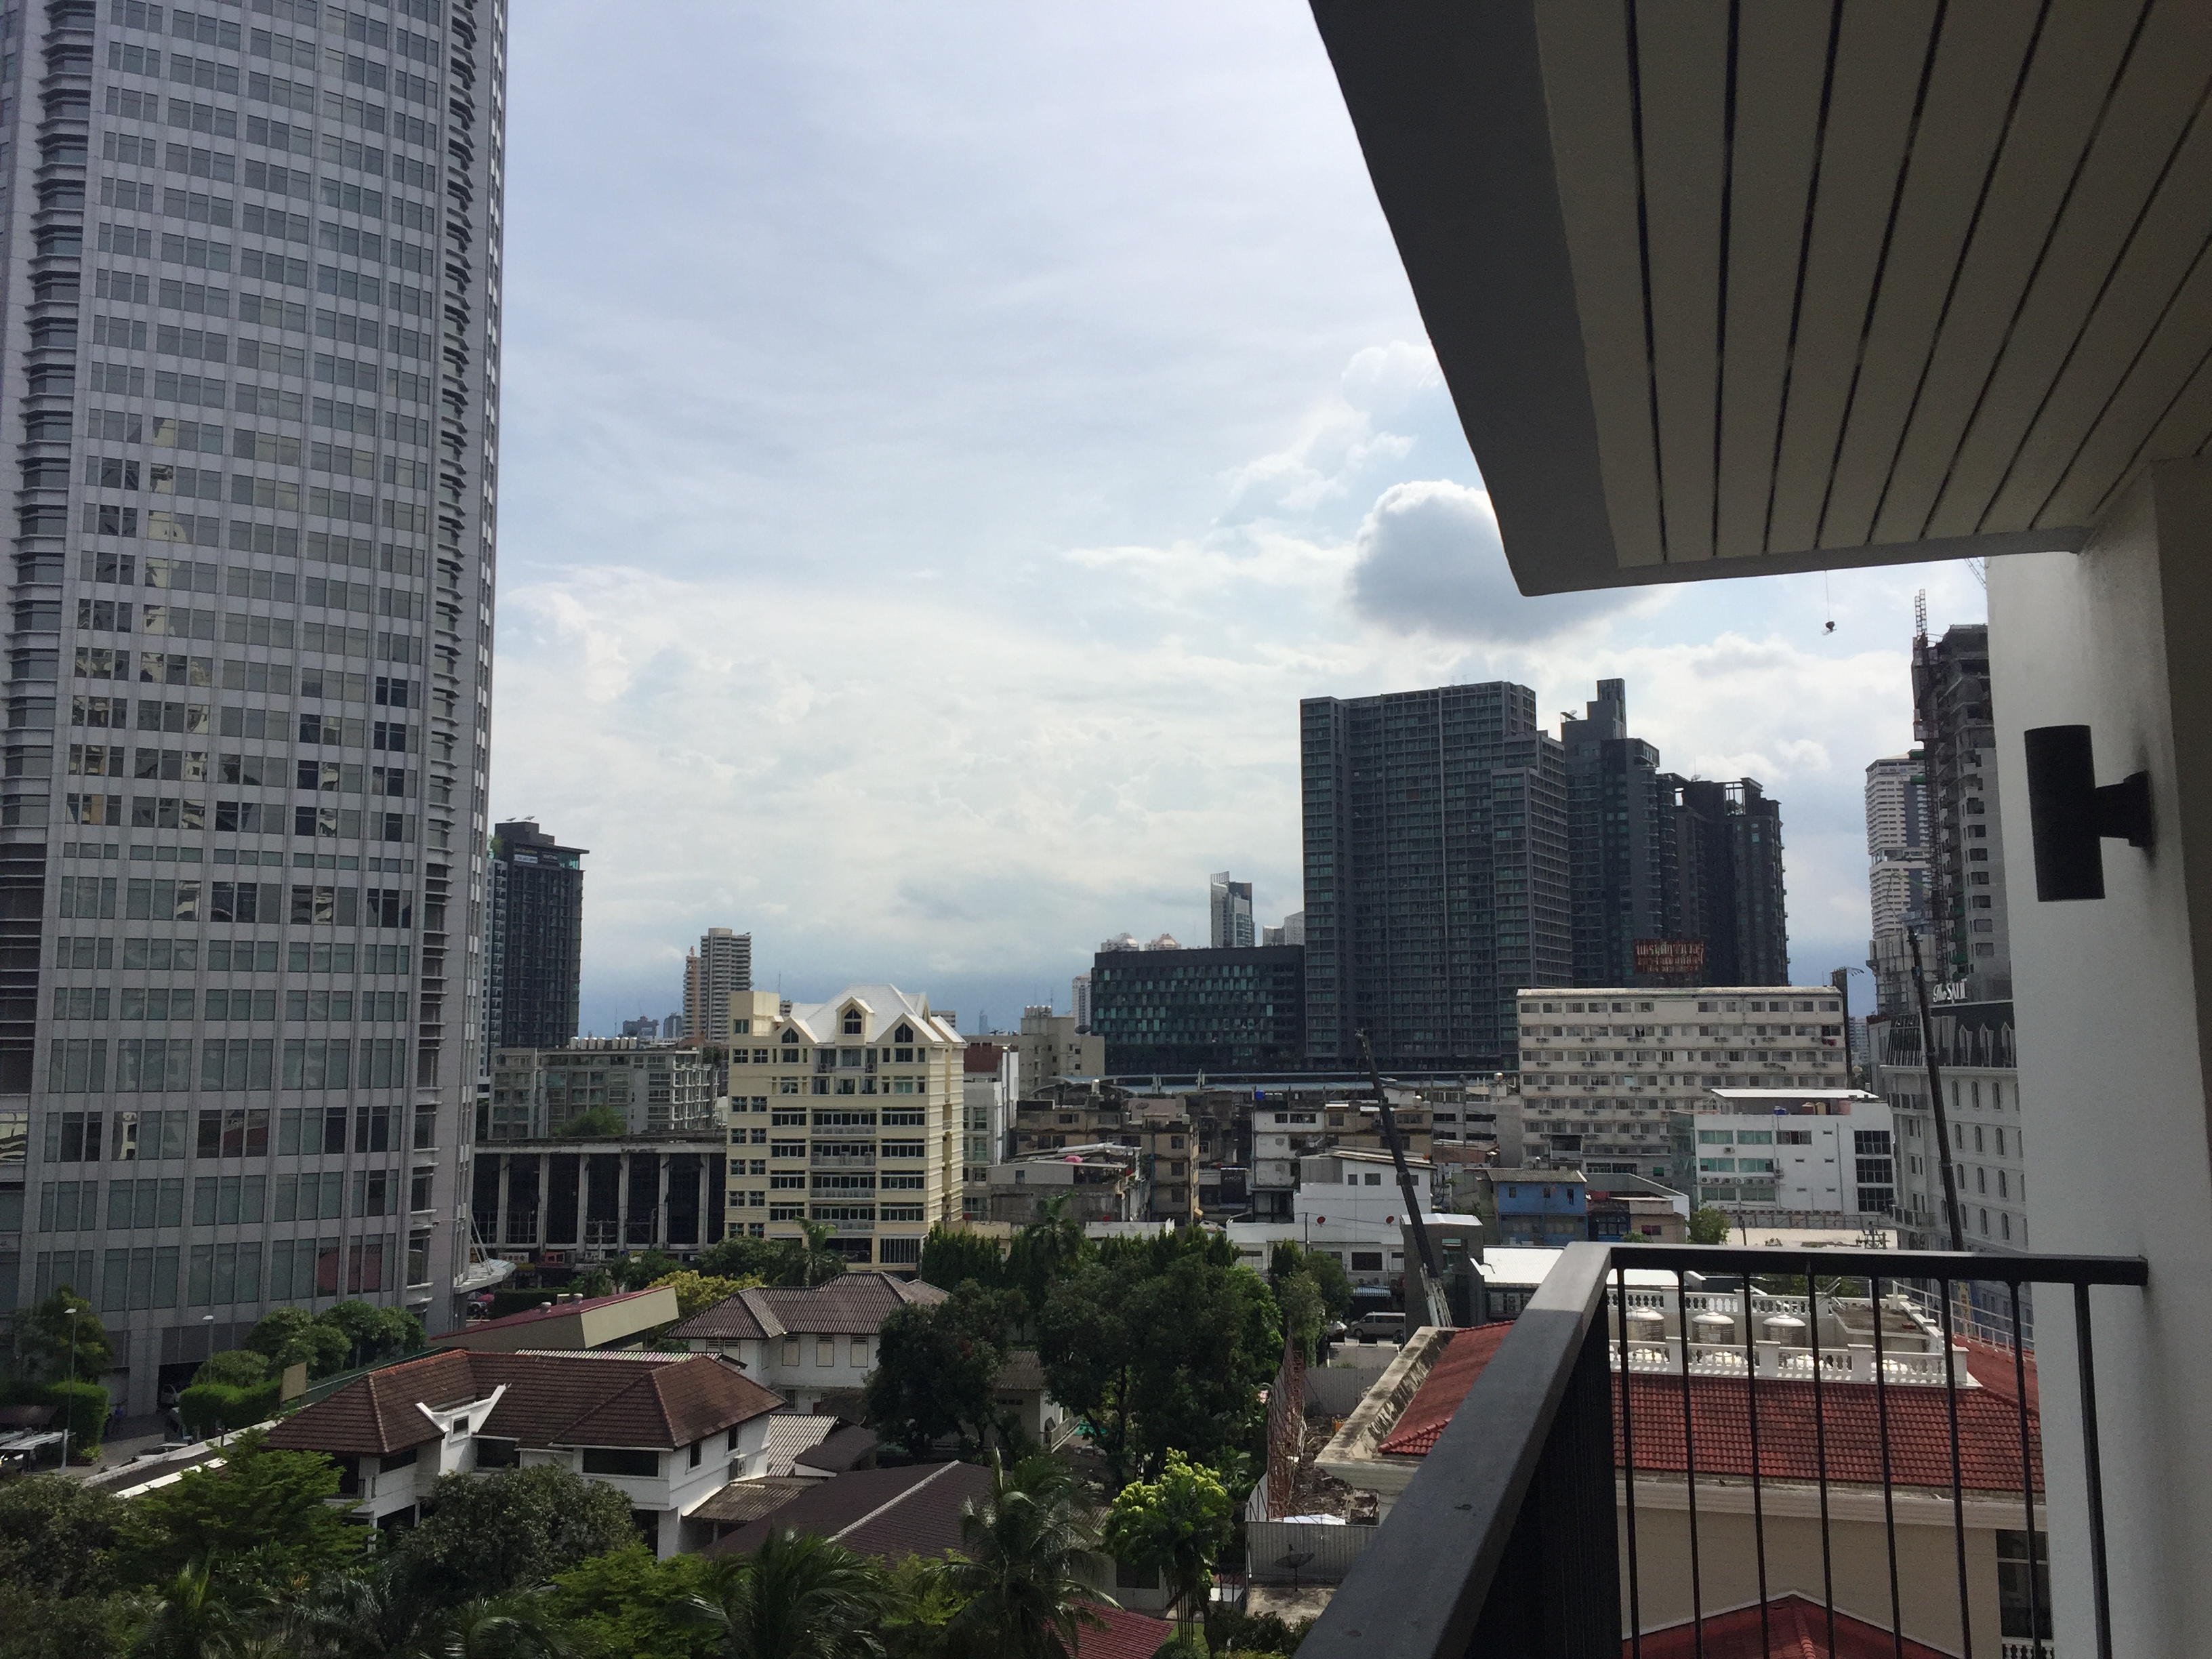 Condo for rent/sale 3 bedroom 119 sq.m. Corner room, Nice view, Walk to Thong lor station.